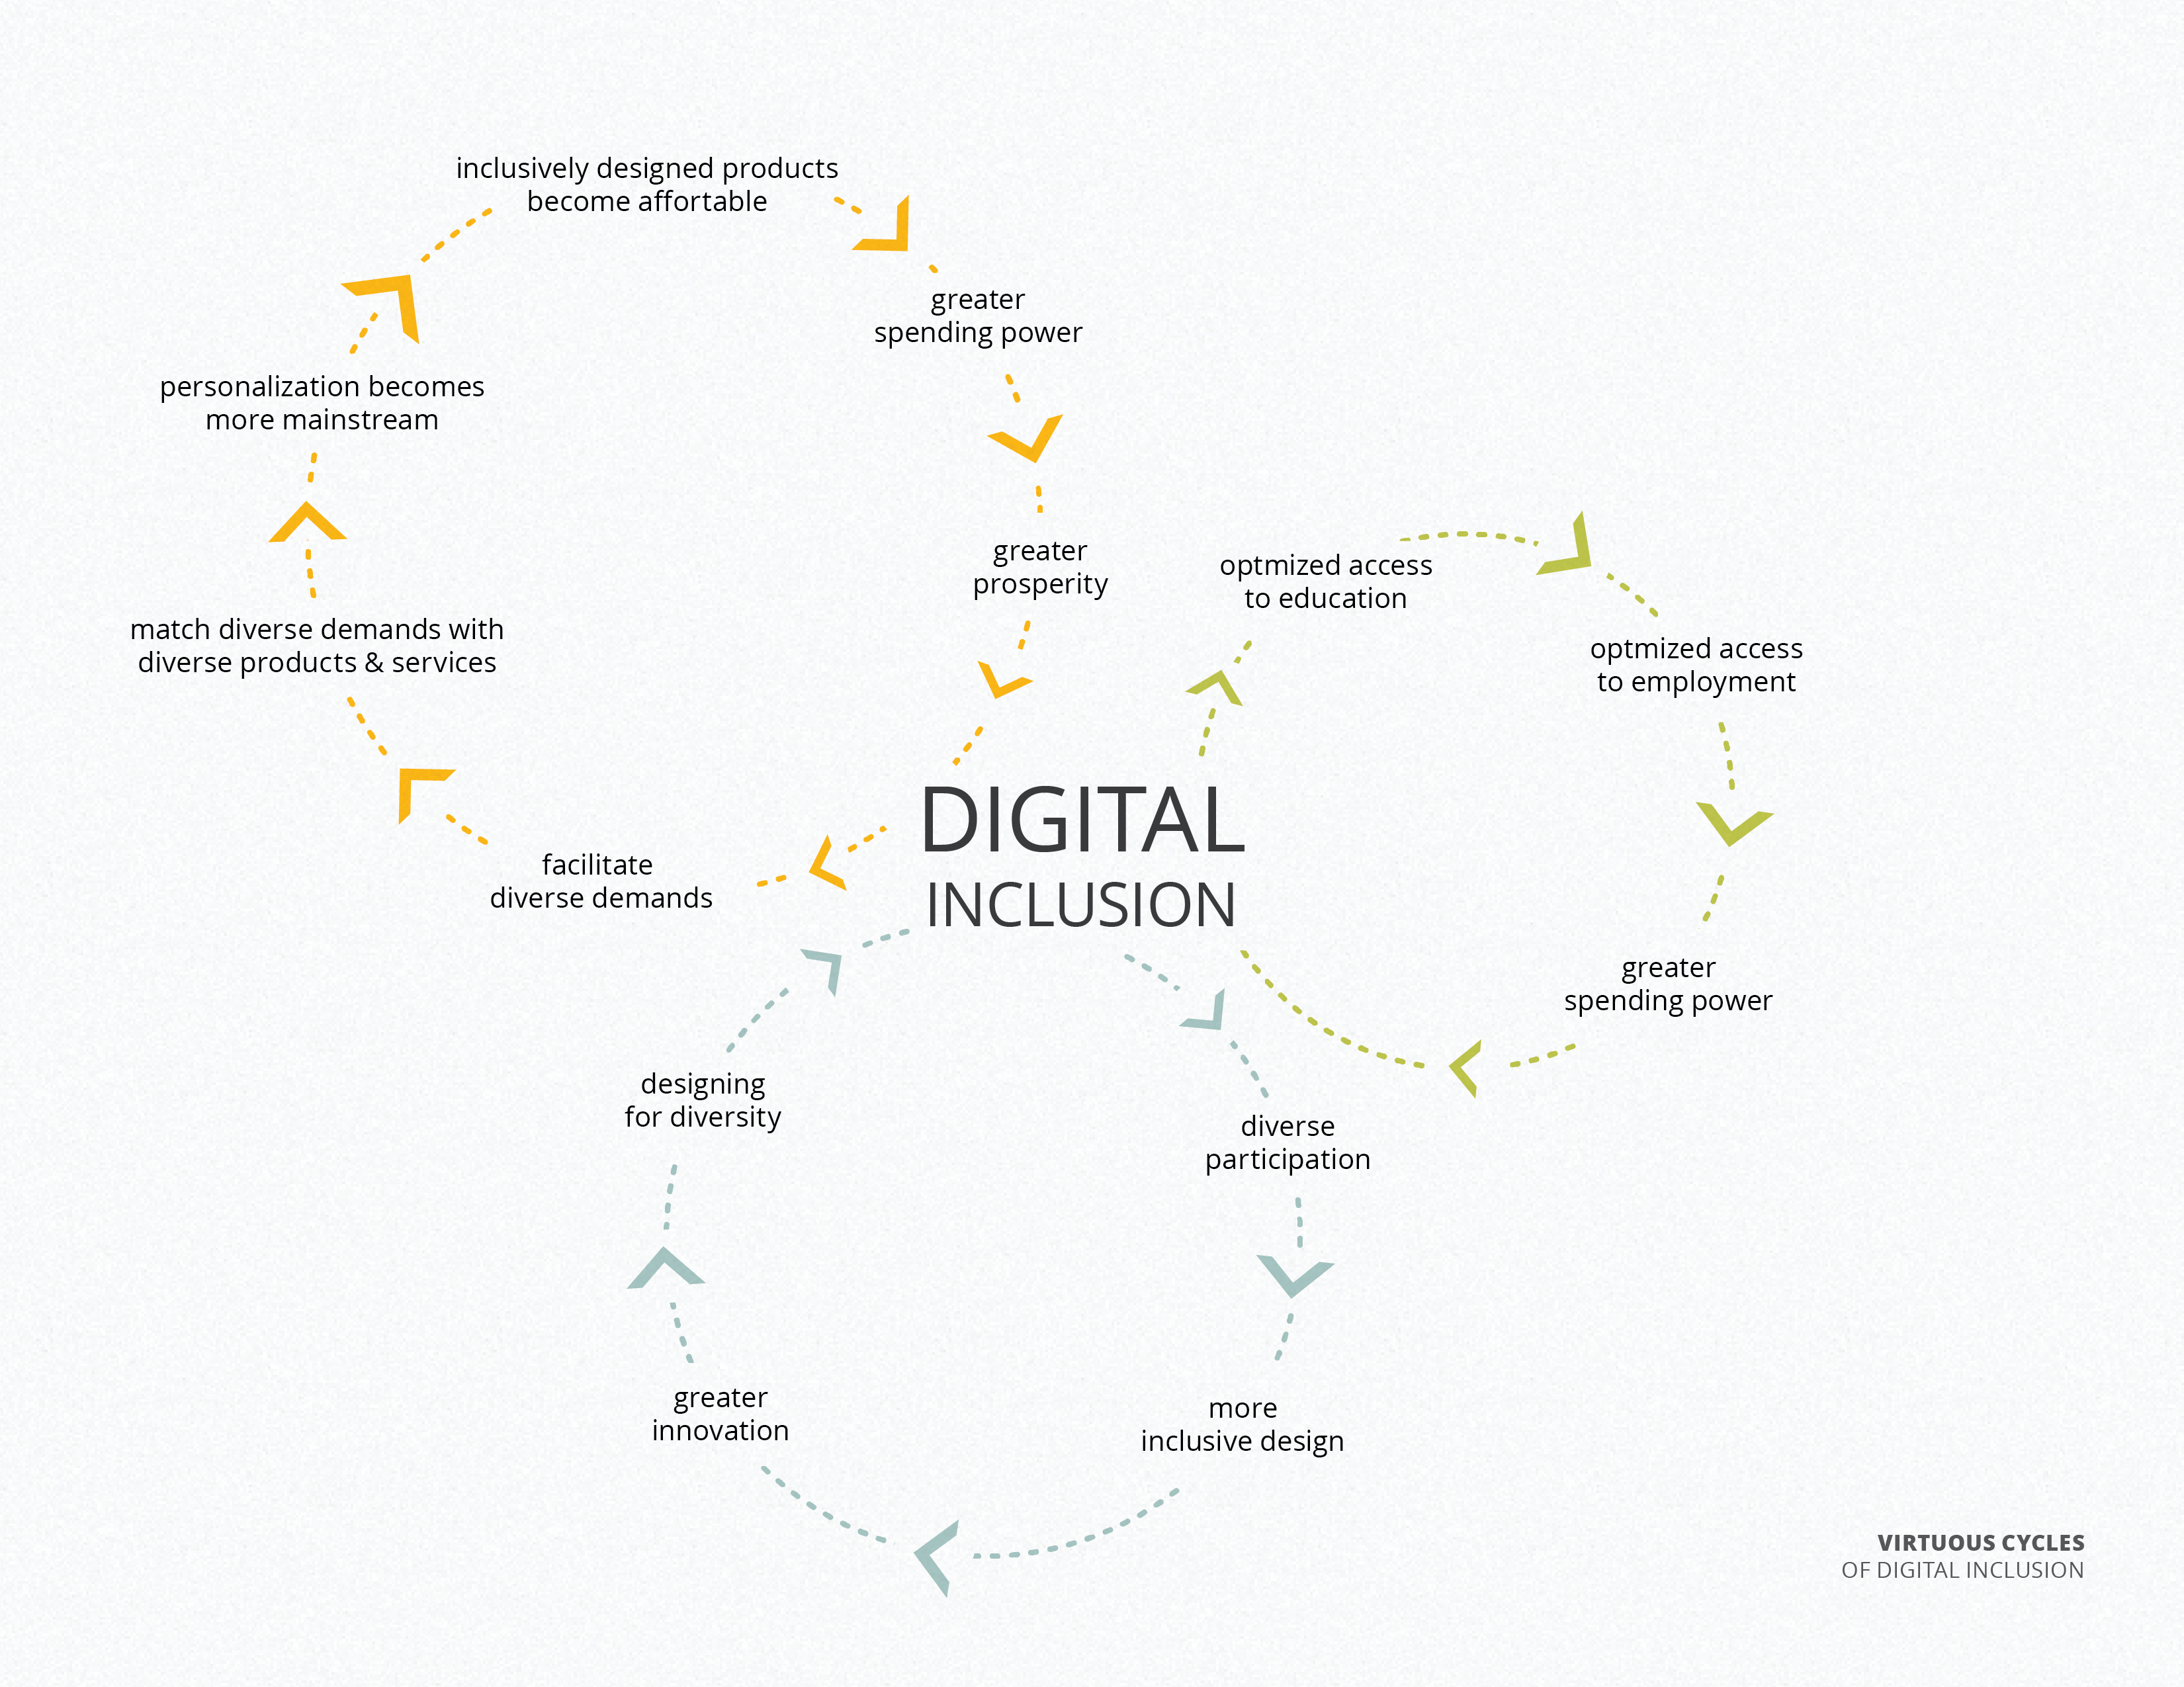 Figure 2. Virtuous Cycle of Digital Inclusion”